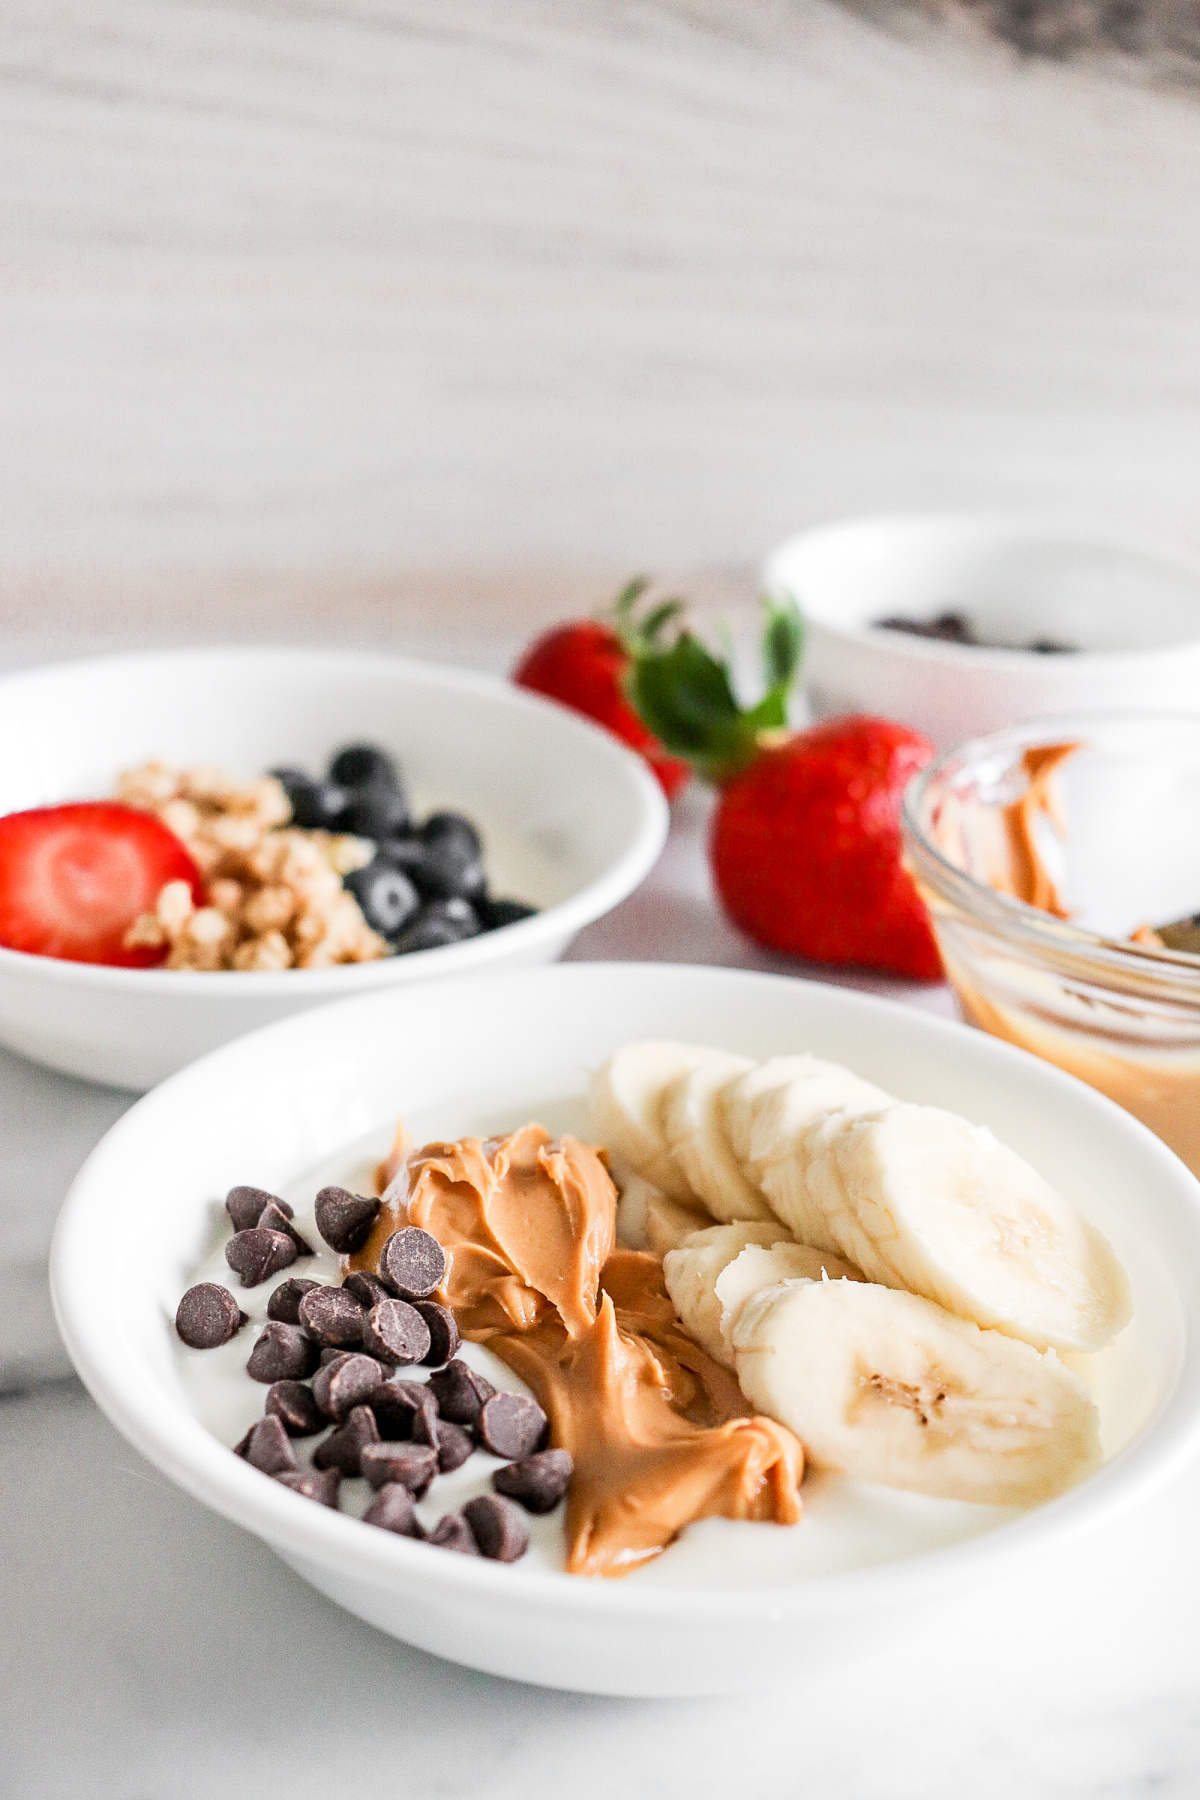 Yogurt bowls with fruit and peanut butter